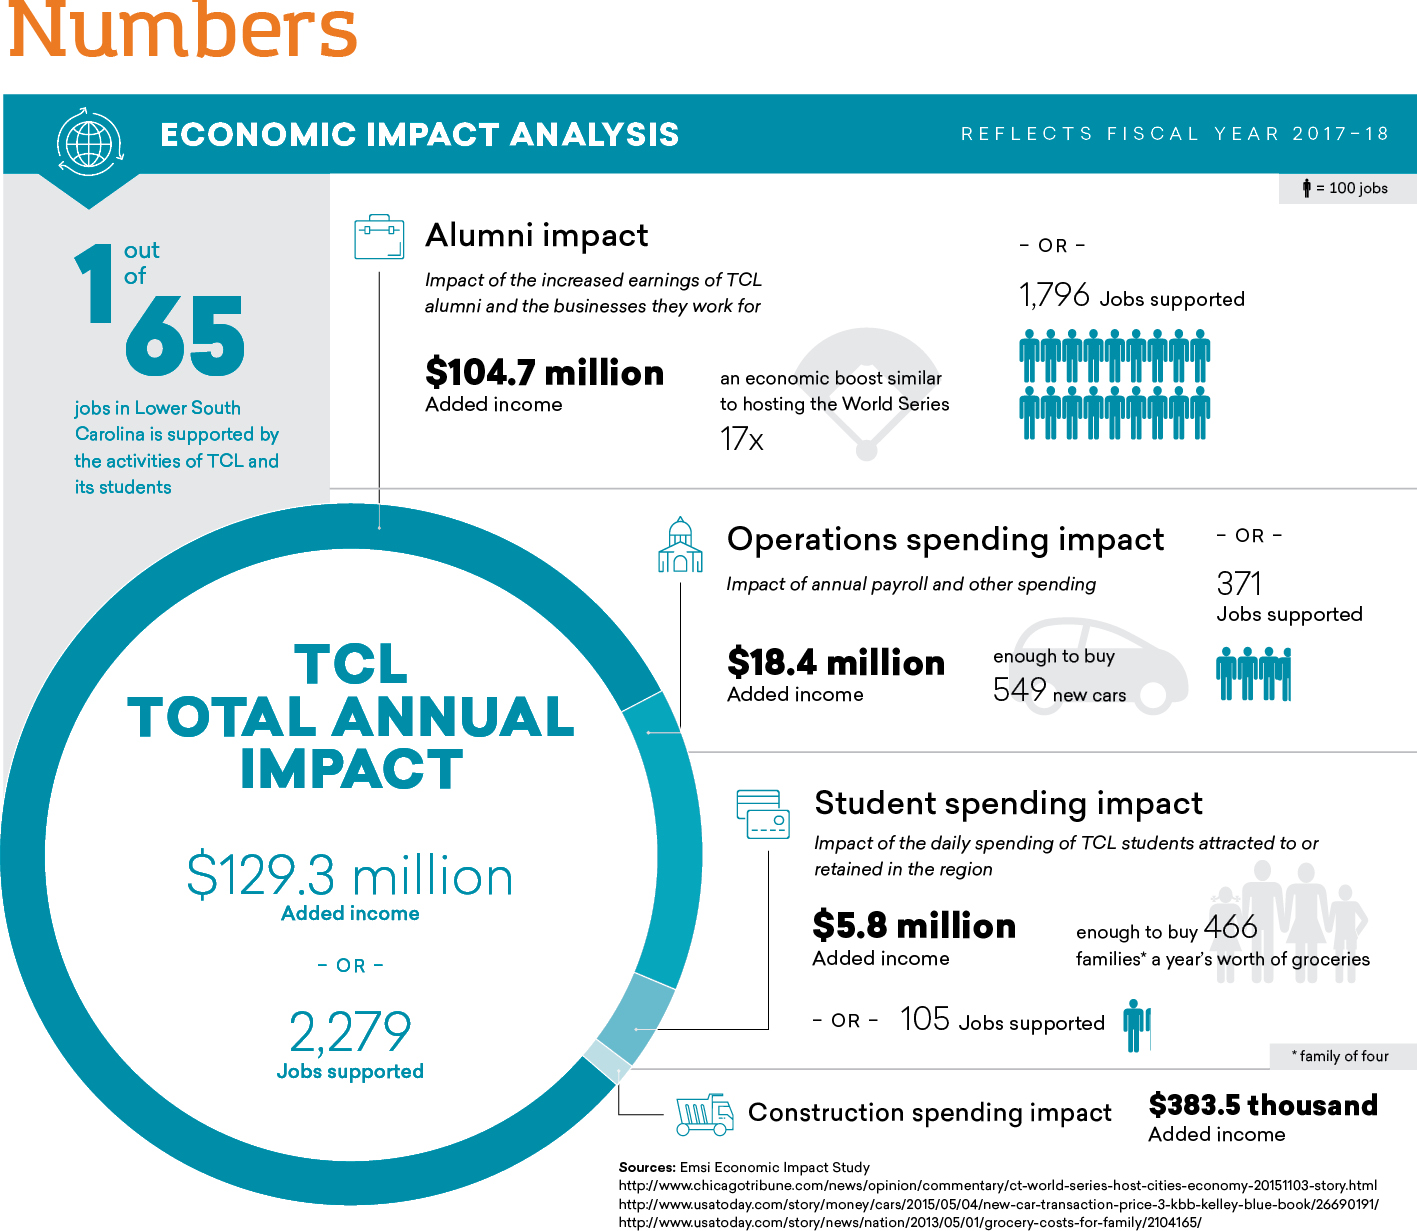 Real Numbers: (reflects fiscal year 2017-2018). One out of 65 jobs in Lower South Carolina is supported by the activities of TCL and its students. Alumni impact:
Impact of the increased earnings of TCL alumni and the businesses they work for: $104.7 million
Added income; an economic boost similar 
to hosting the World Series
17 times; or, 1,796 Jobs supported. Operations spending impact: Impact of annual payroll and other spending: $18.4 million
Added income; enough to buy 
549 new cars, or 371
Jobs supported. Student spending impact: Impact of the daily spending of TCL students attracted to or retained in the region: $5.8 million
Added income; enough to buy 466 families a year’s worth of groceries, or 105 Jobs supported. Construction spending impact: $383.5 thousand added income. TCL Total Annual Impact: $129.3 million added income; or, 2,279
Jobs supported. Sources: Emsi Economic Impact Study
https://www.chicagotribune.com/news/opinion/commentary/ct-world-series-host-cities-economy-20151103-story.html
https://www.usatoday.com/story/money/cars/2015/05/04/new-car-transaction-price-3-kbb-kelley-blue-book/26690191/
https://www.usatoday.com/story/news/nation/2013/05/01/grocery-costs-for-family/2104165/